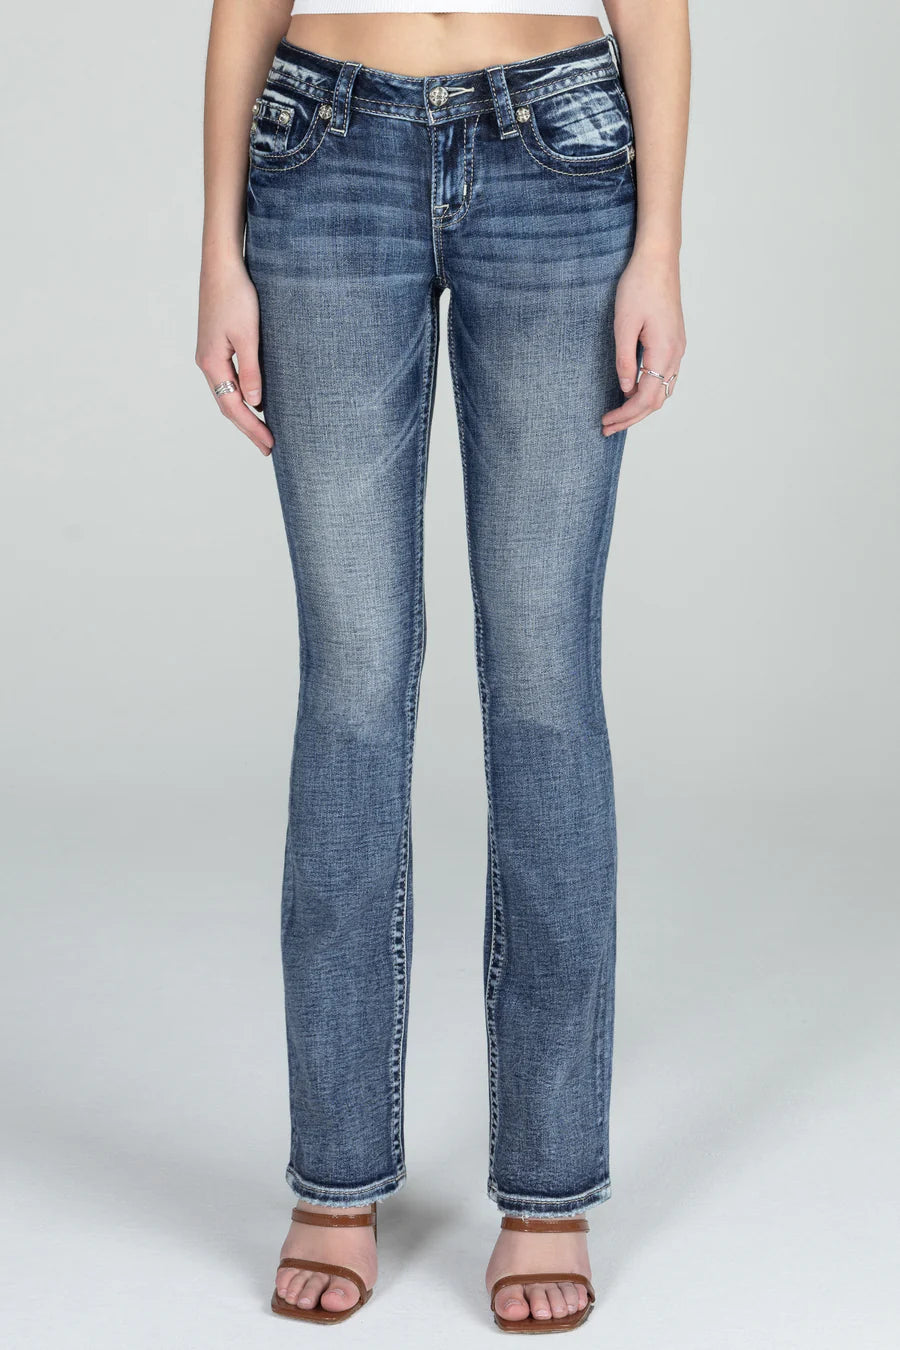 K1331 Low Rise Boot Jeans